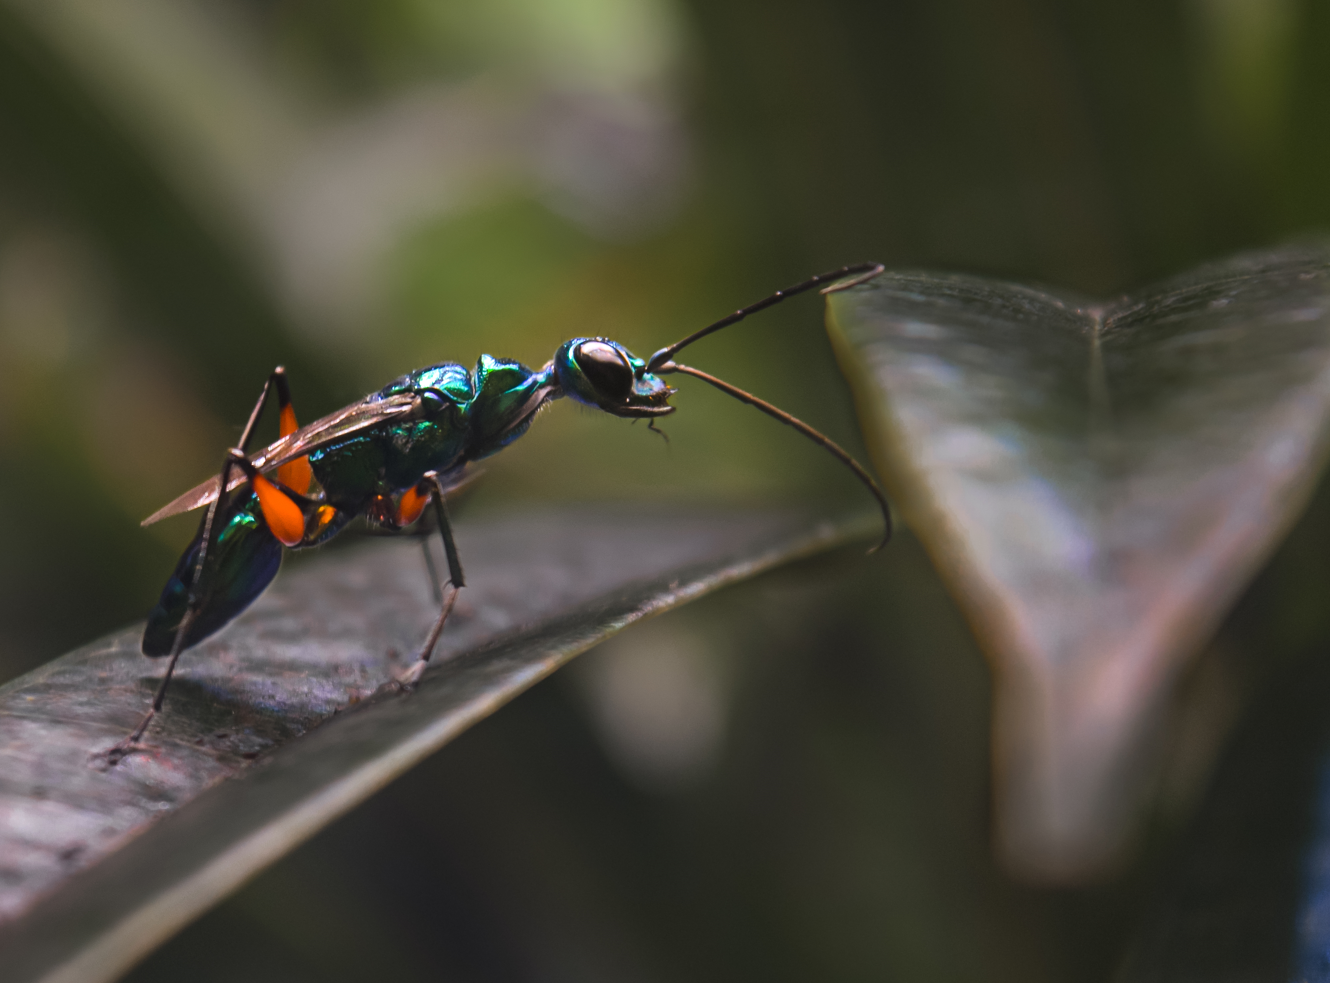 A jewel wasp, one of the winners of the 2022 BIAZA Photography Competition